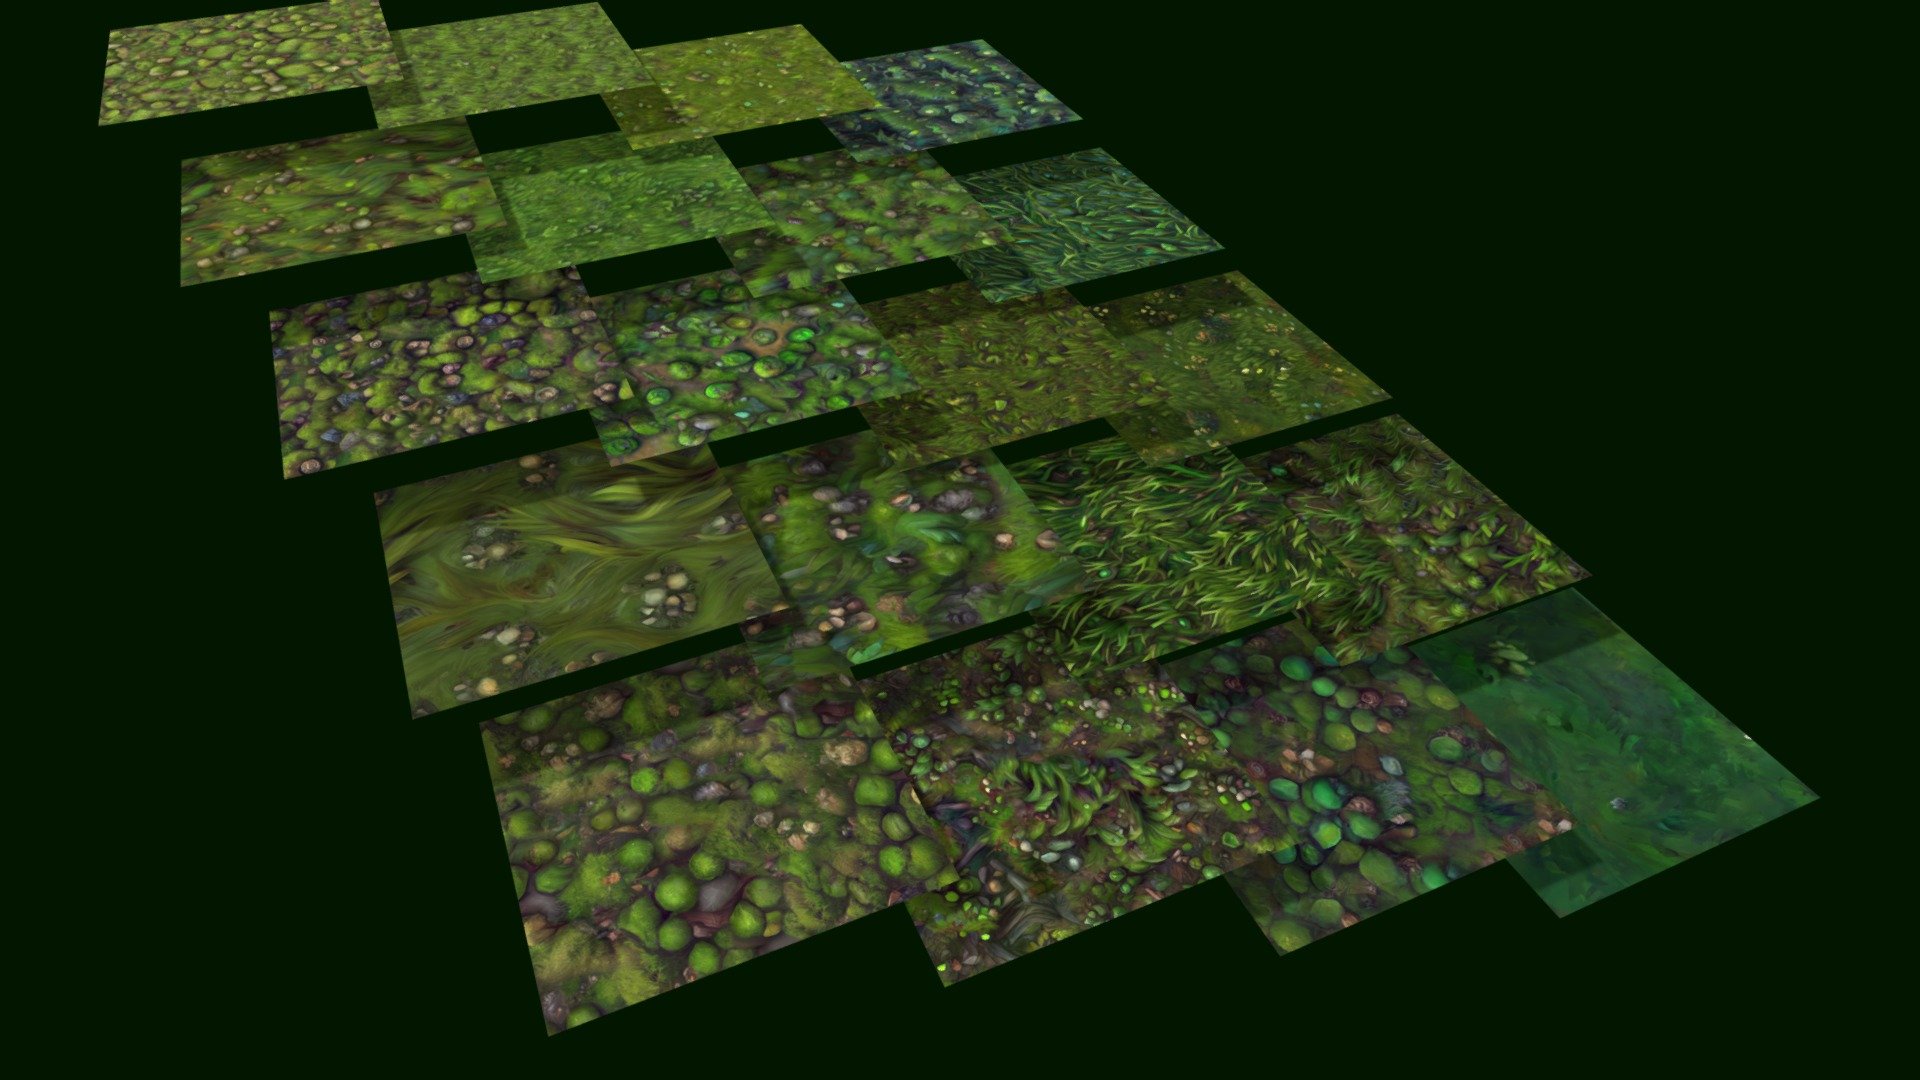 Add the forest-grass textures into your levels! 
Textures were manually crafted to be tileable, meaning they will have no seams.




20 Color Textures (tileable)

2048 x 2048 size

Hand Painted

Mobile friendly

Help us by rating and commenting, this will motivate us to create more assets and improve :) - Grass Forest Floor 20 TEXTURES (Handpainted) - Buy Royalty Free 3D model by Texture Me (@textureme) 3d model